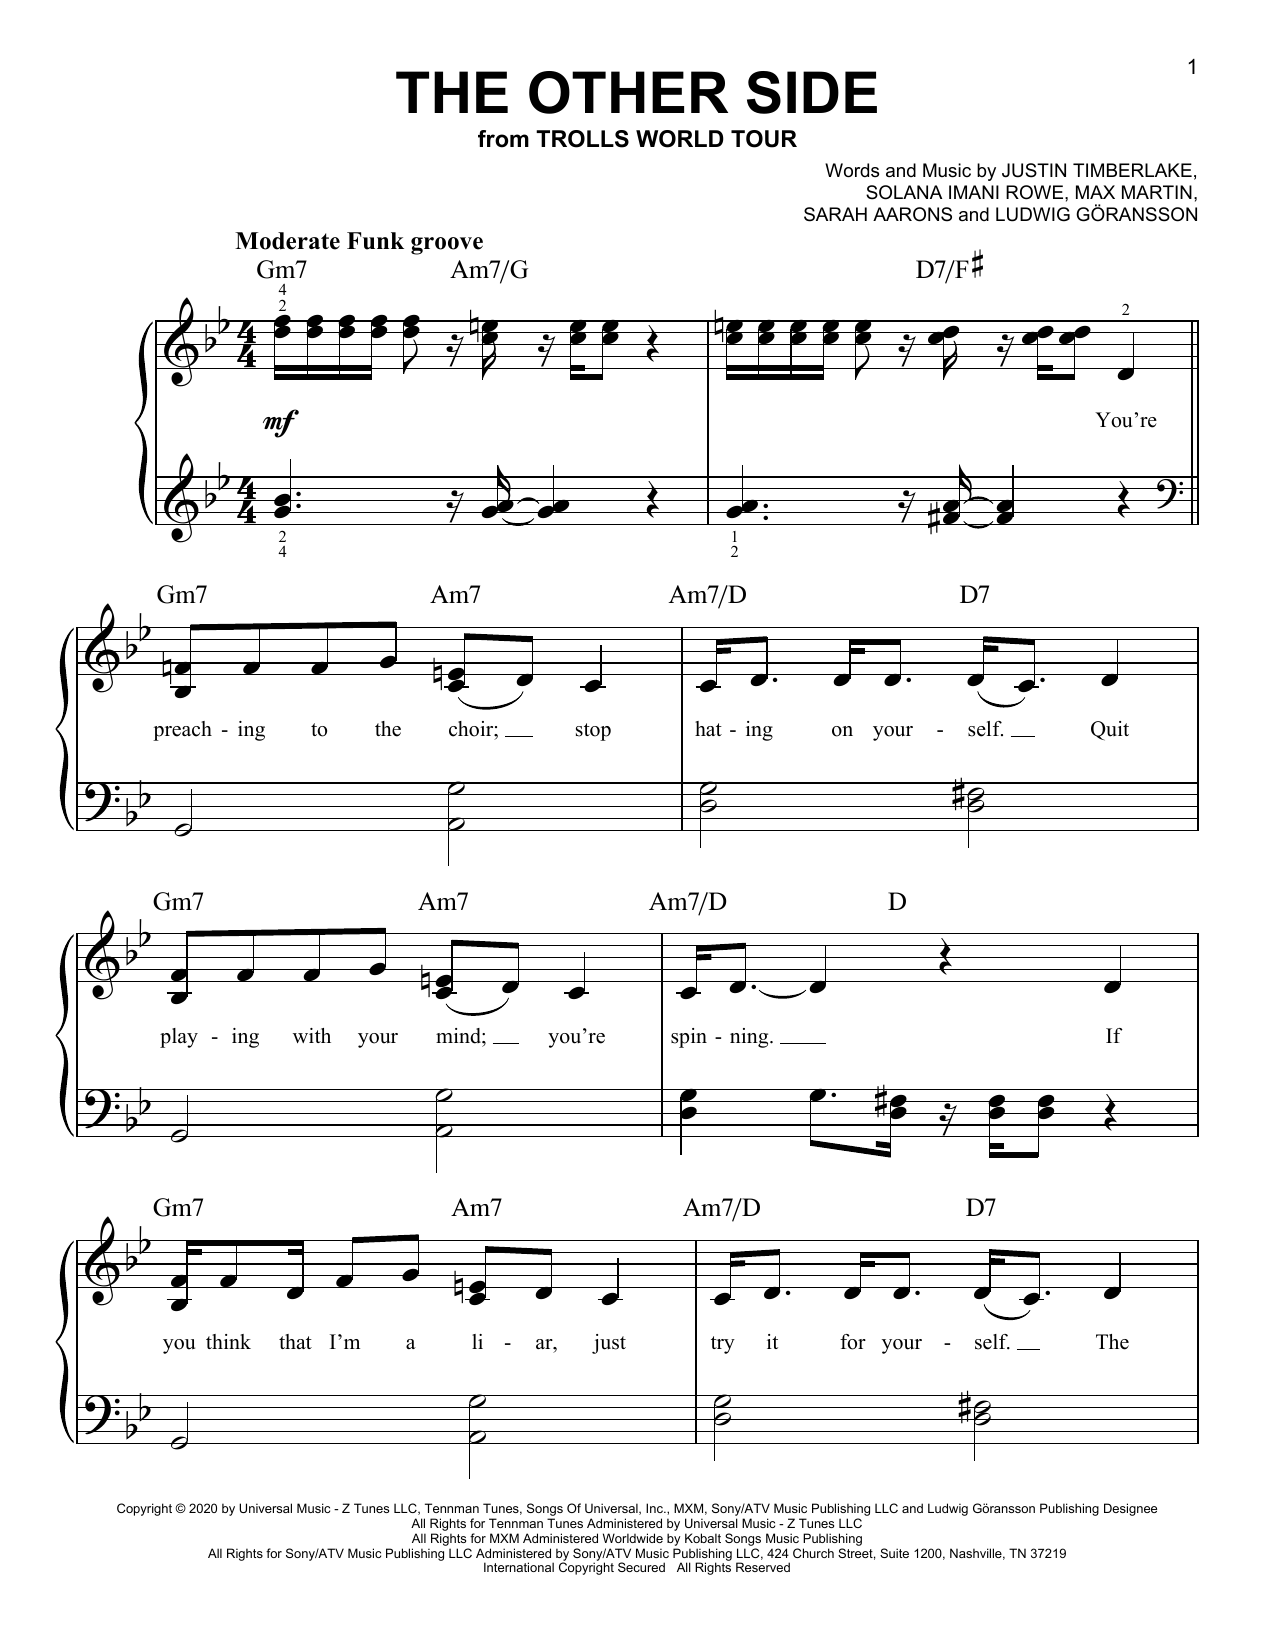 Download SZA & Justin Timberlake The Other Side (from Trolls World Tour) Sheet Music